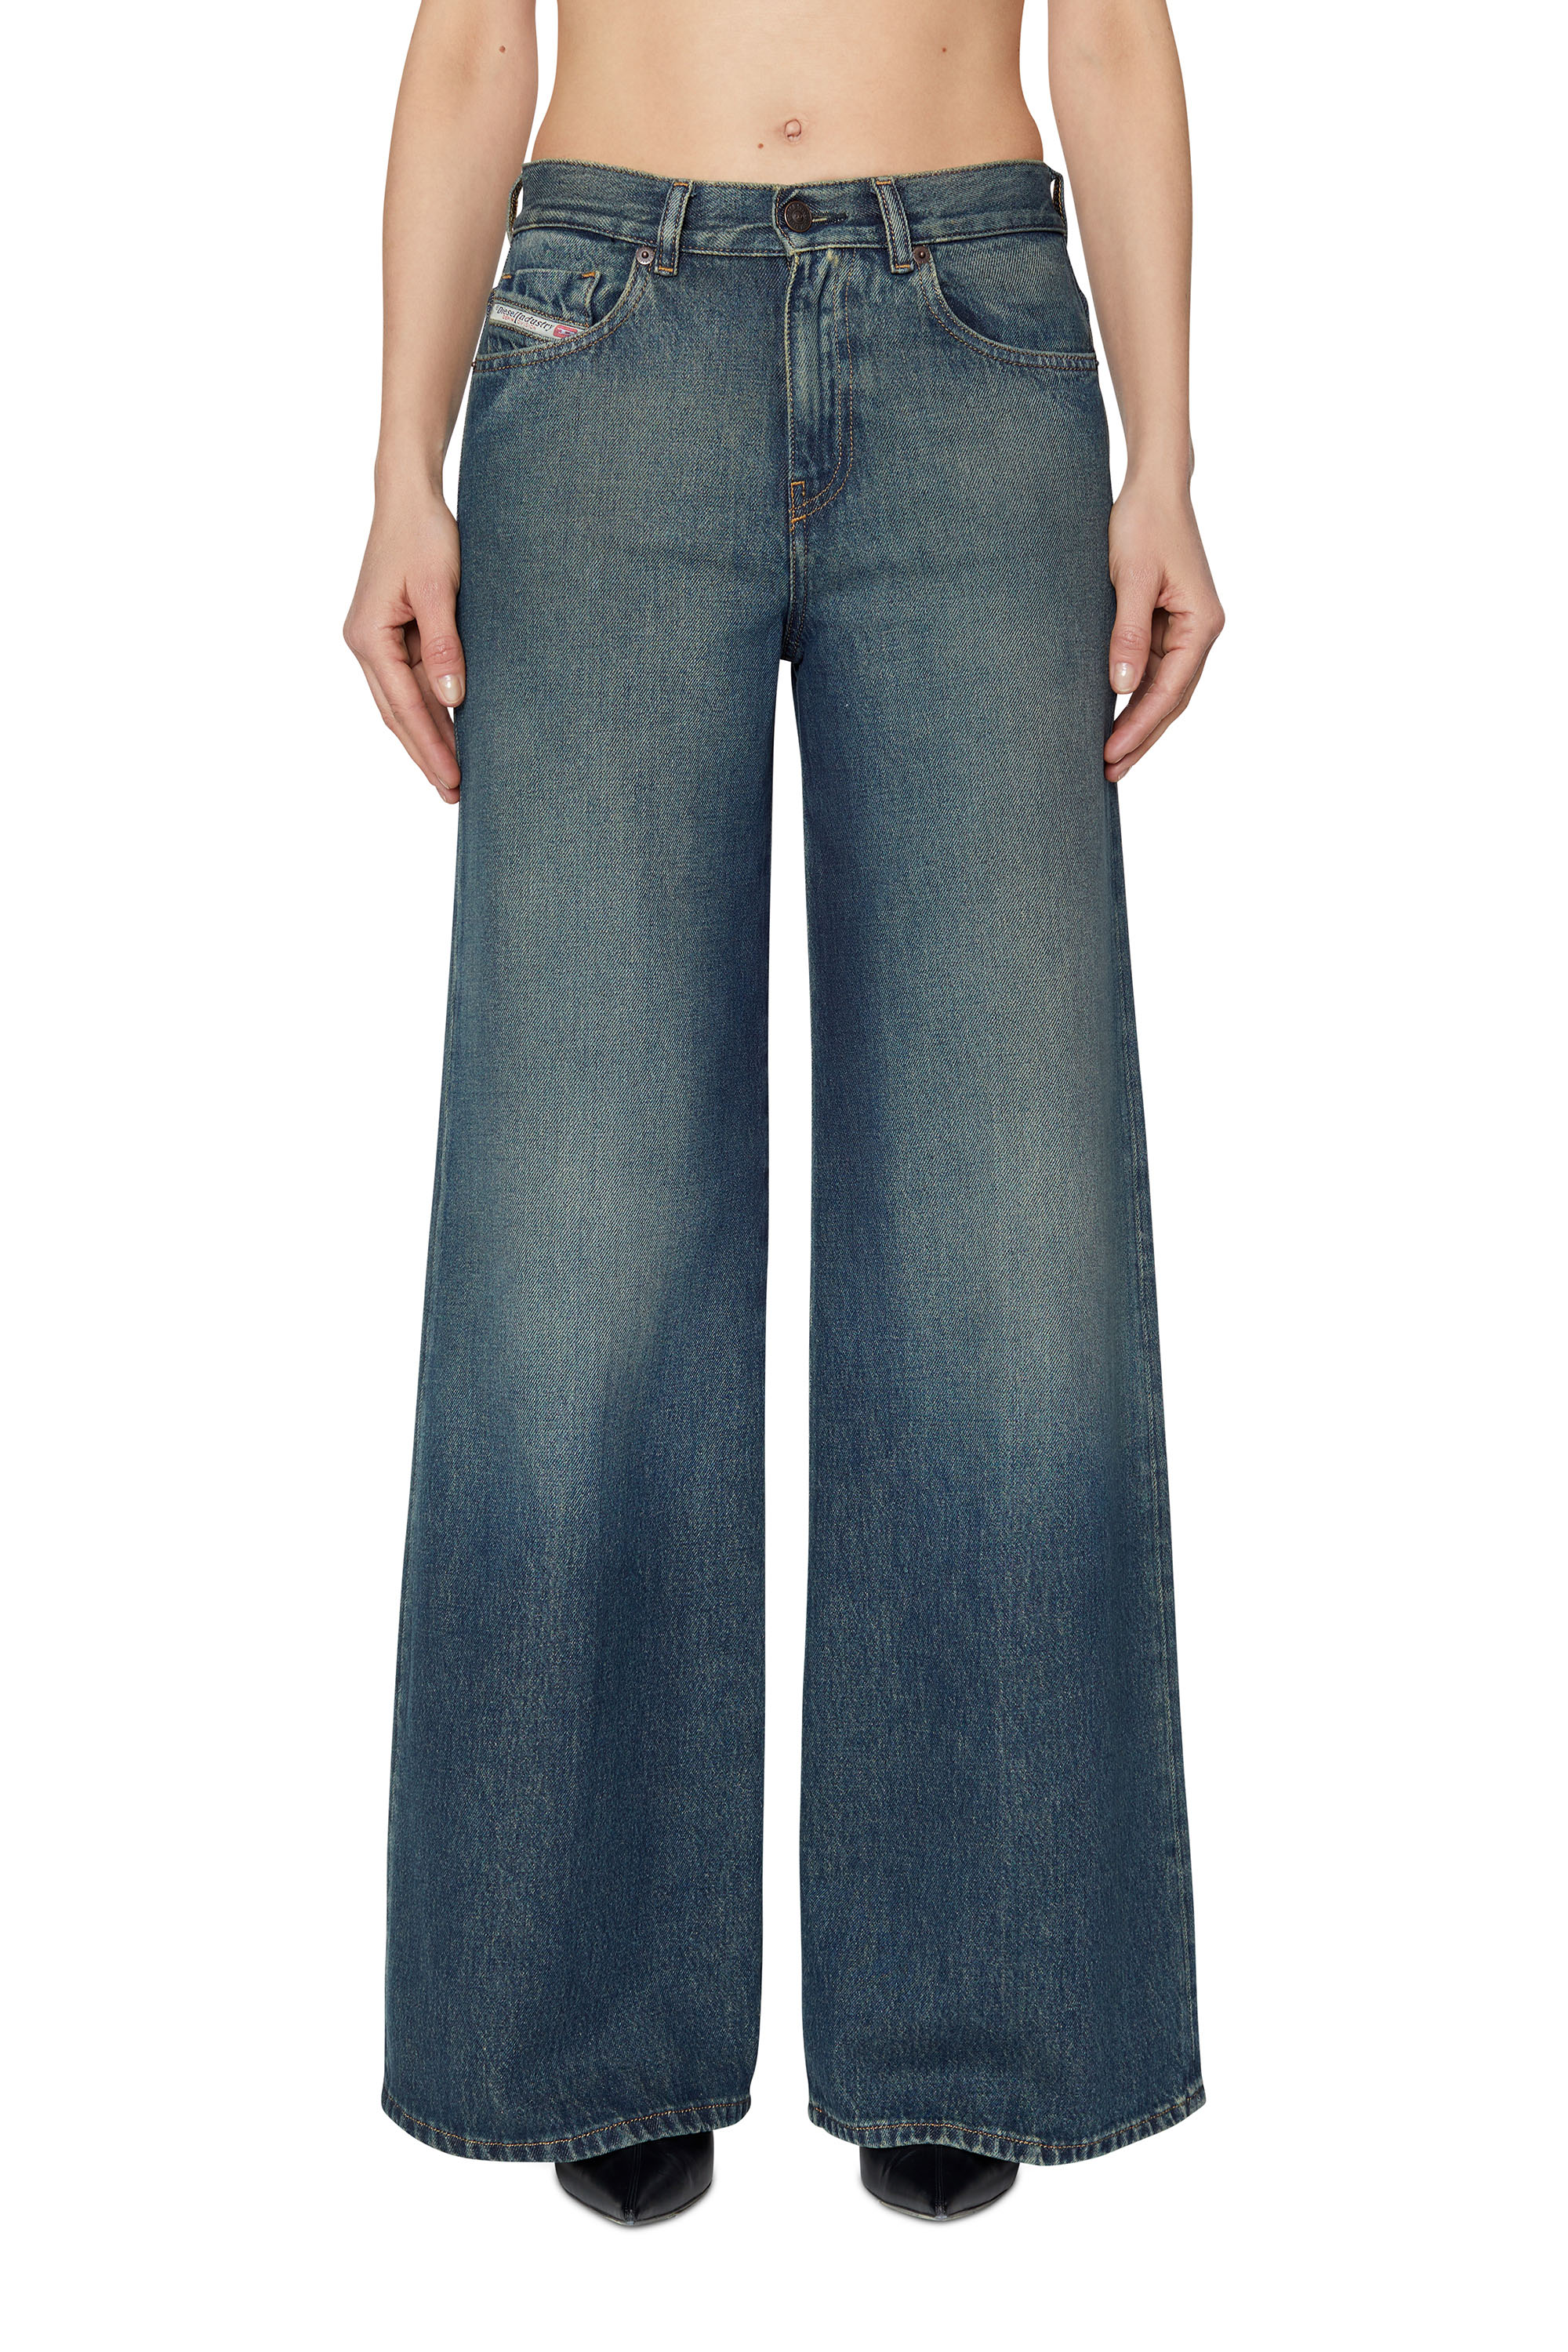 1978 09C04 Bootcut and Flare Jeans, Dunkelblau - Jeans